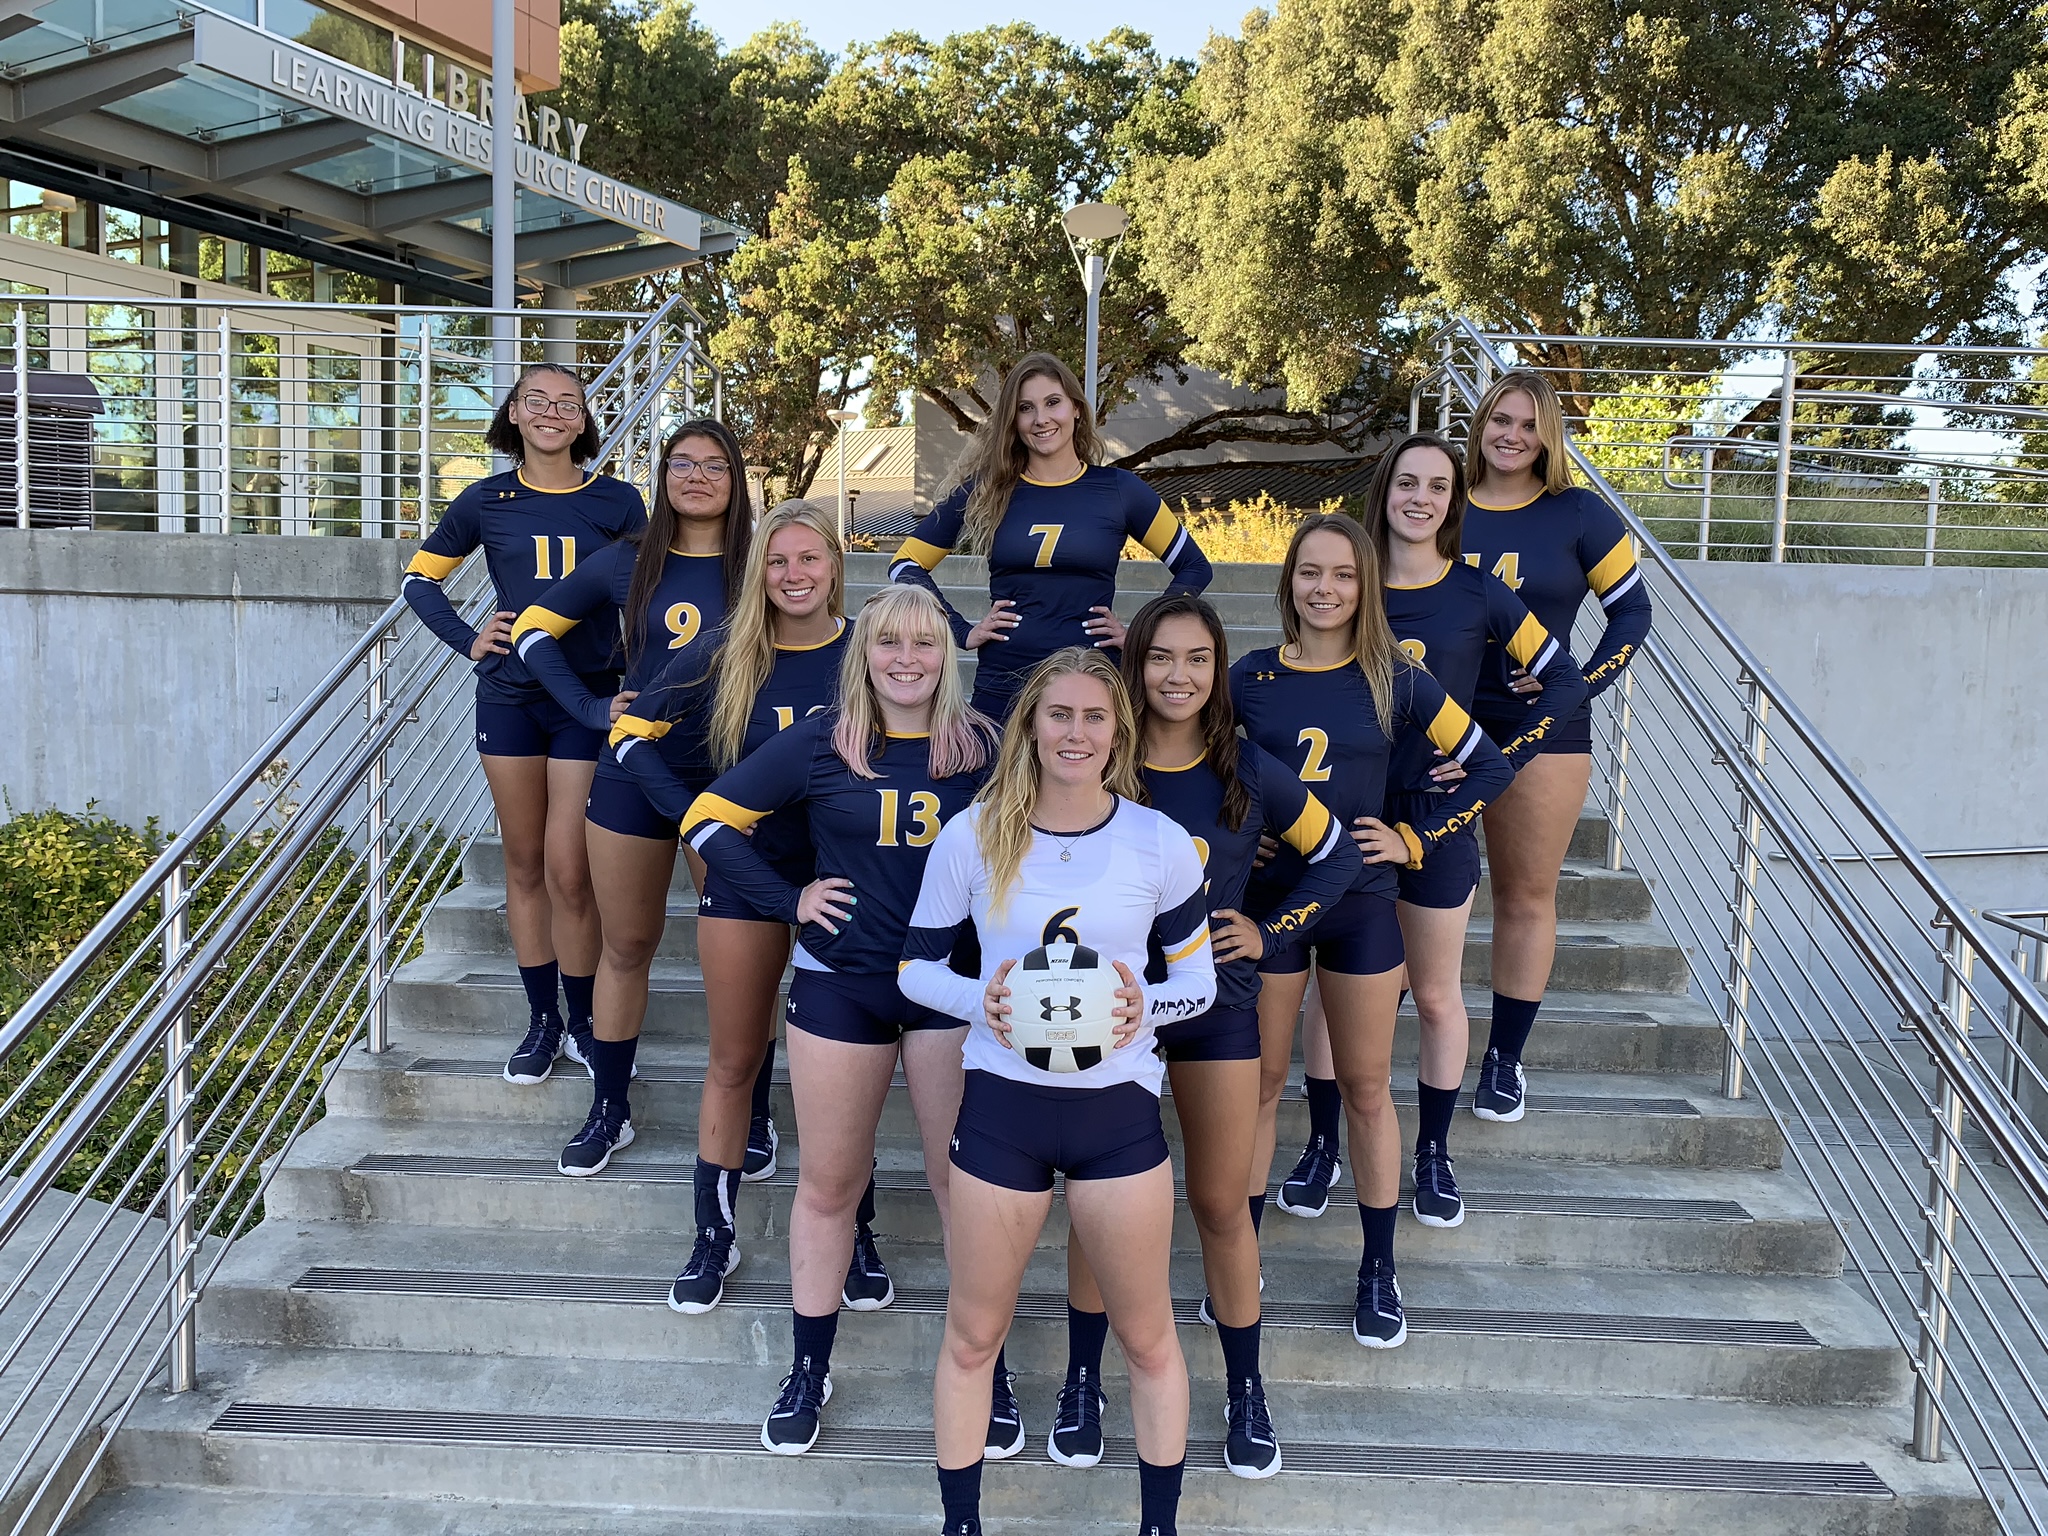 Lady Eagles Volleyball 2019